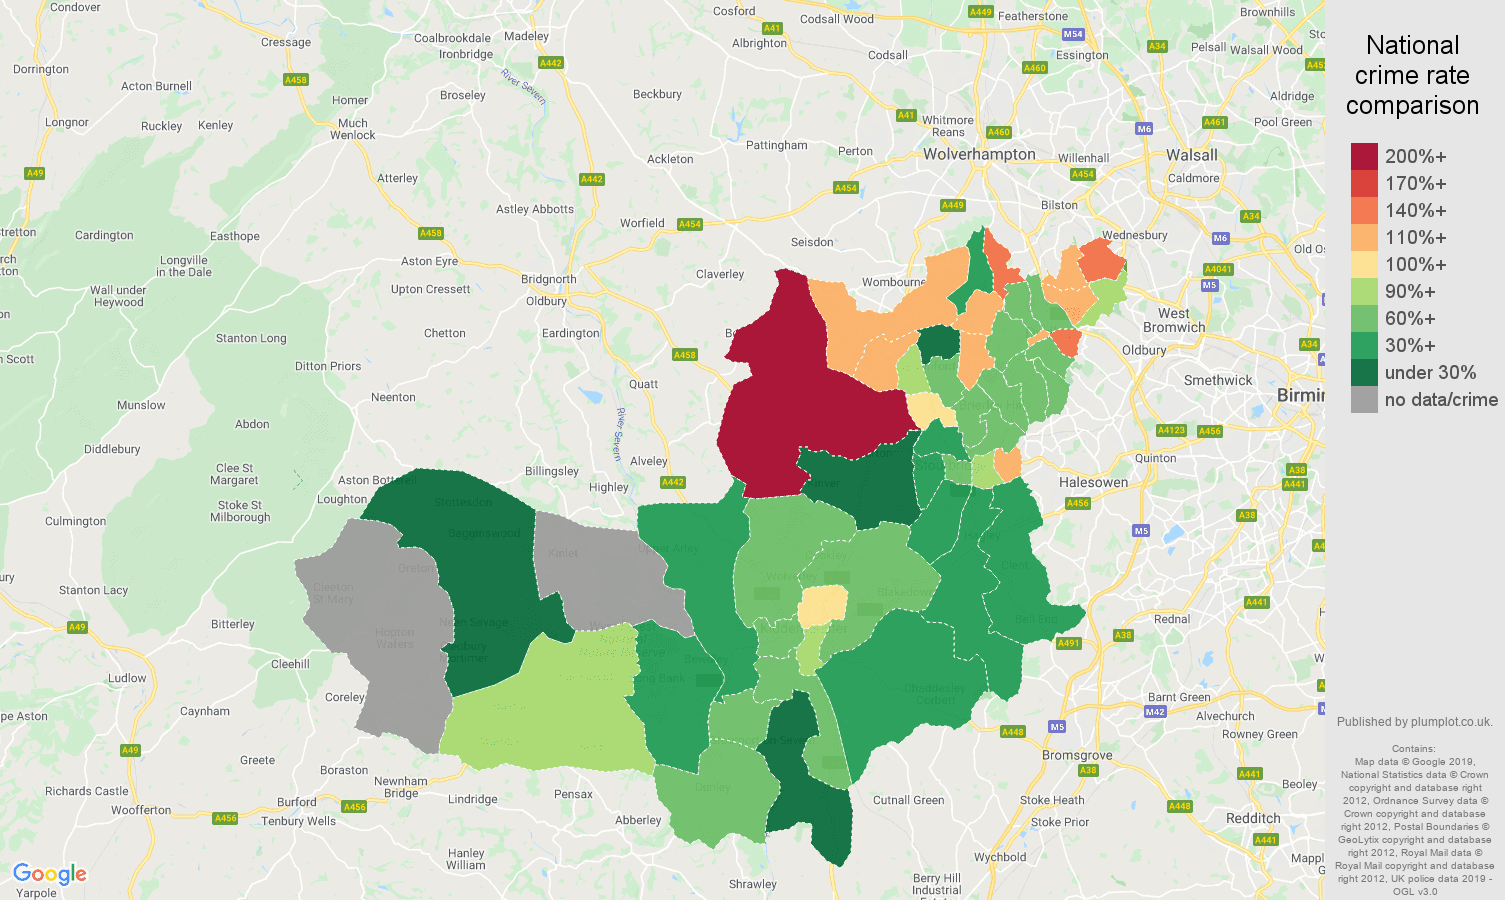 Dudley other crime rate comparison map